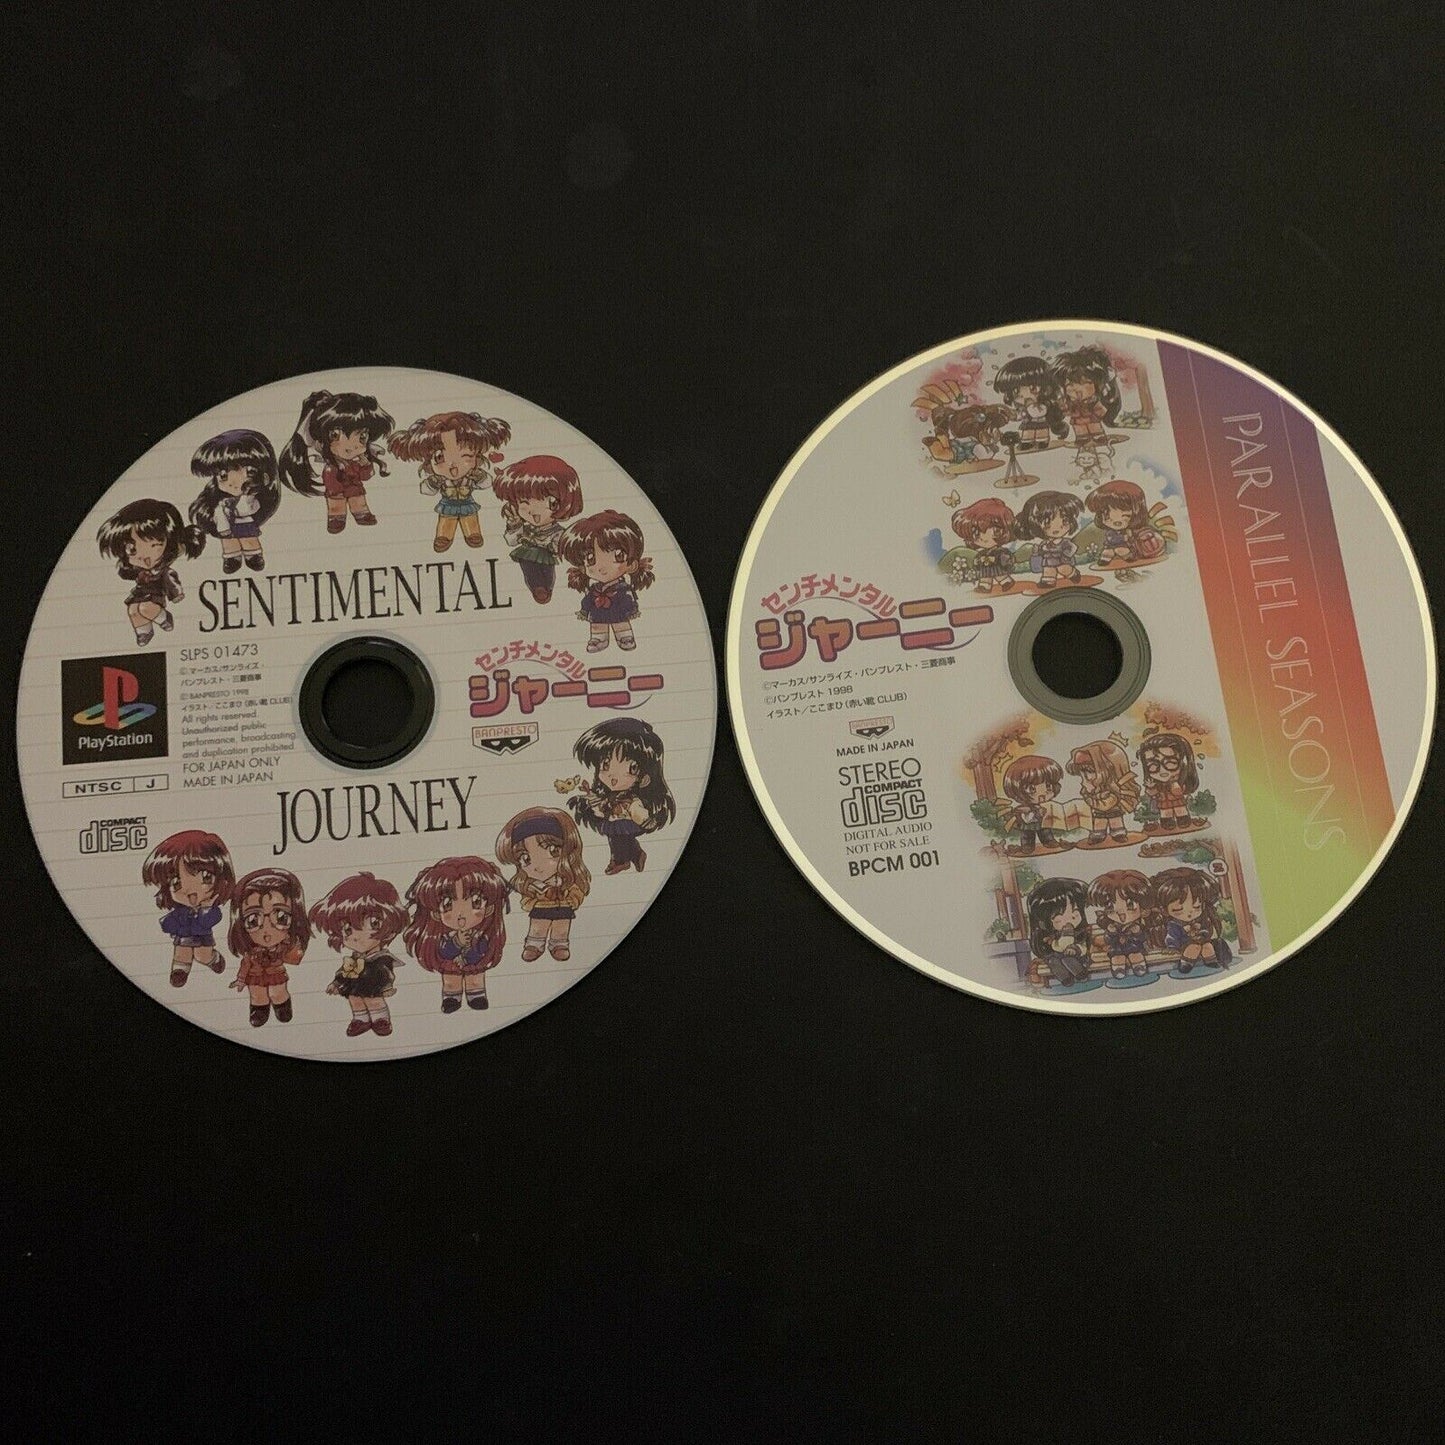 Sentimental Journey - Playstation PS1 NTSC-J Japan Dating Game with Music CD